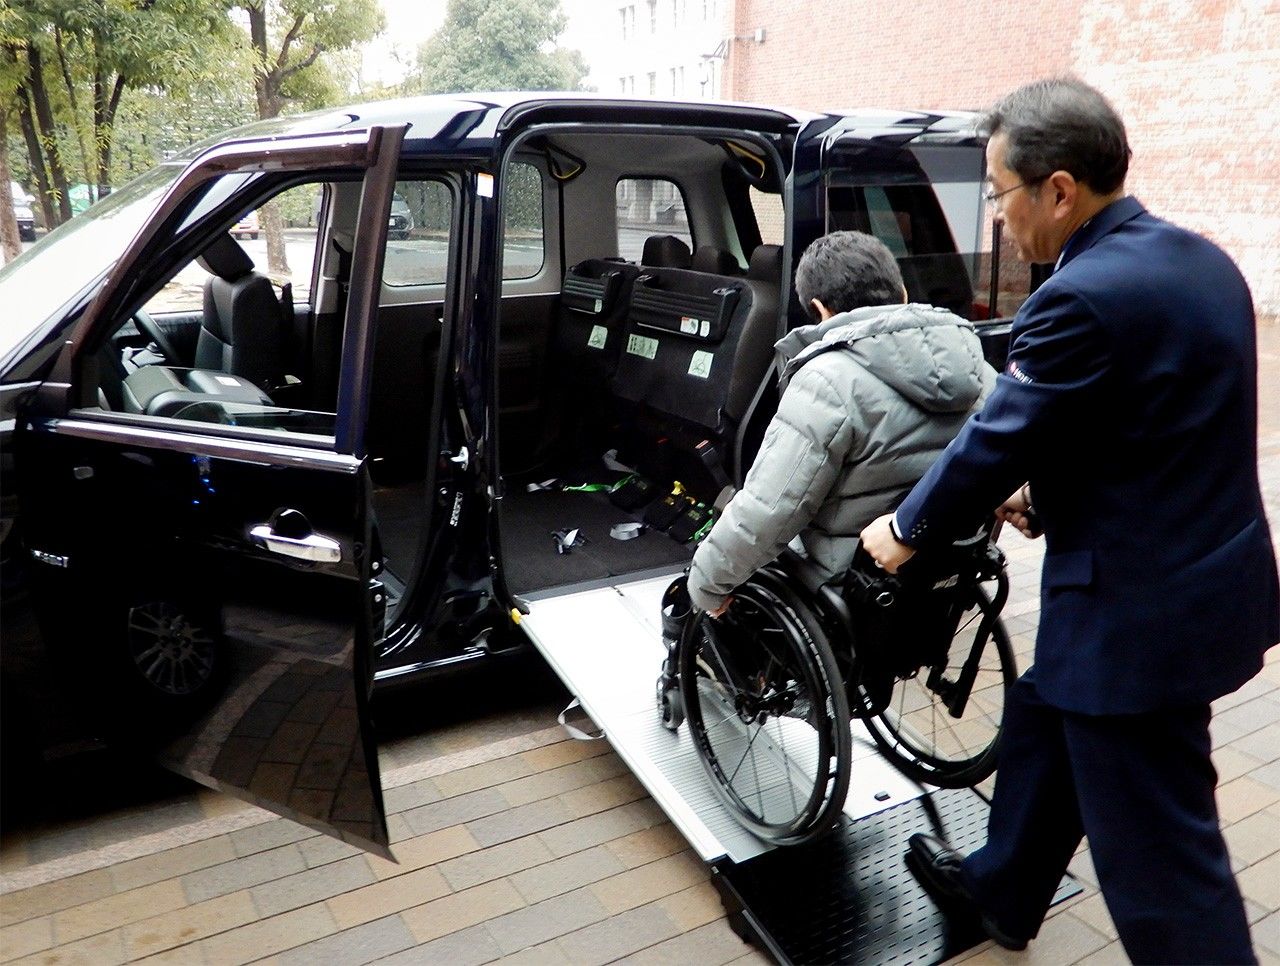 A passenger in Nagoya boards Toyota’s Japan Taxi on January 31, 2019, using the improved ramp. (© Jiji)